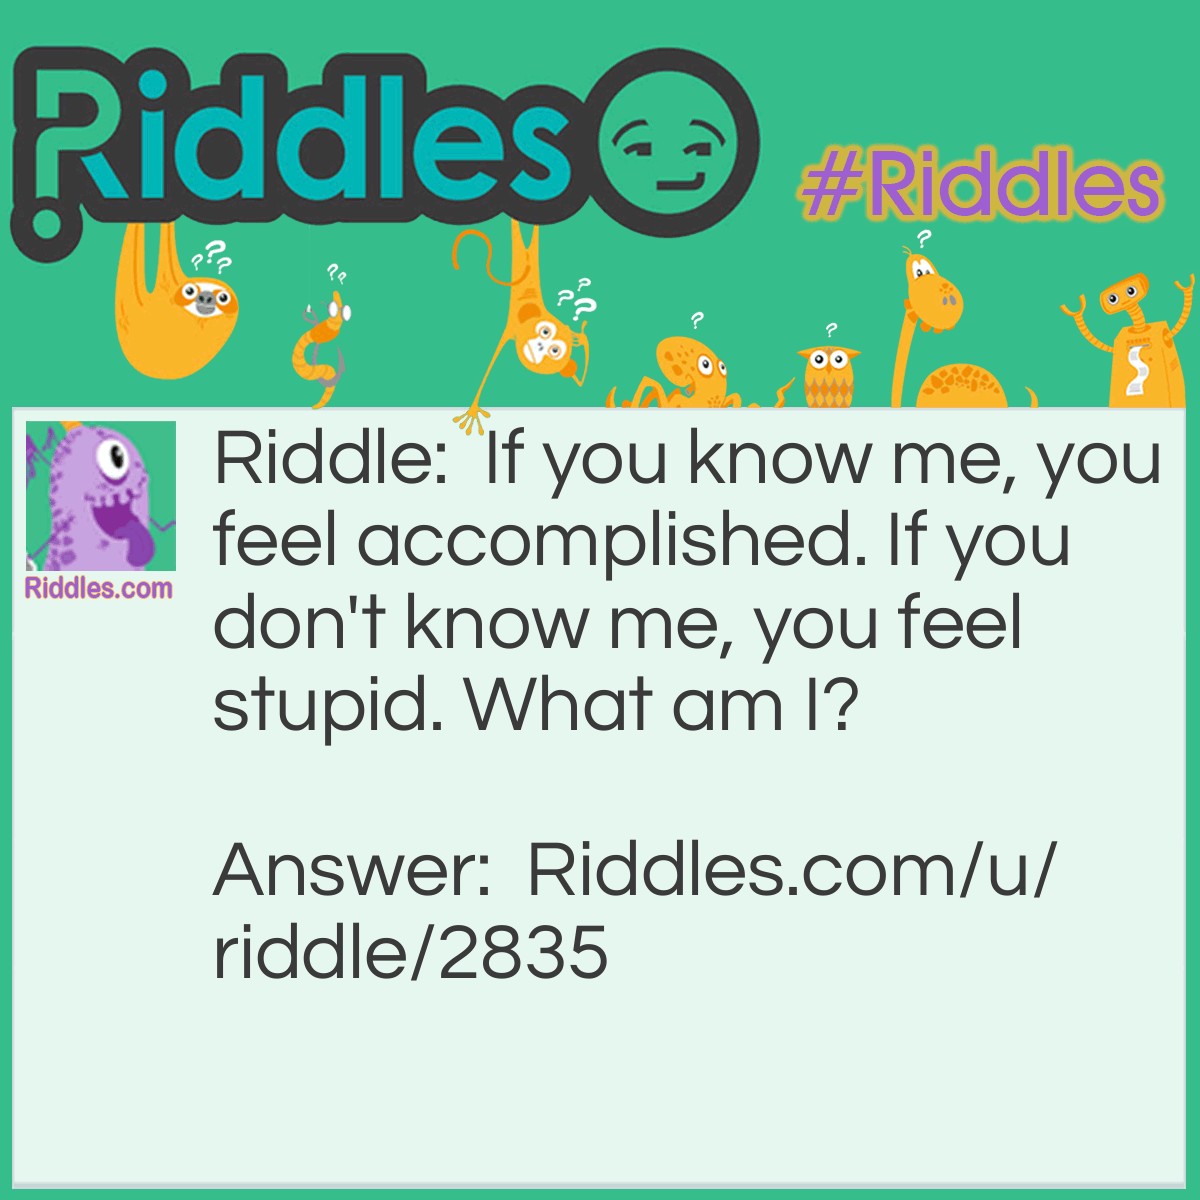 Riddle: If you know me, you feel accomplished. If you don't know me, you feel stupid. What am I? Answer: The answer to a riddle, stupid.